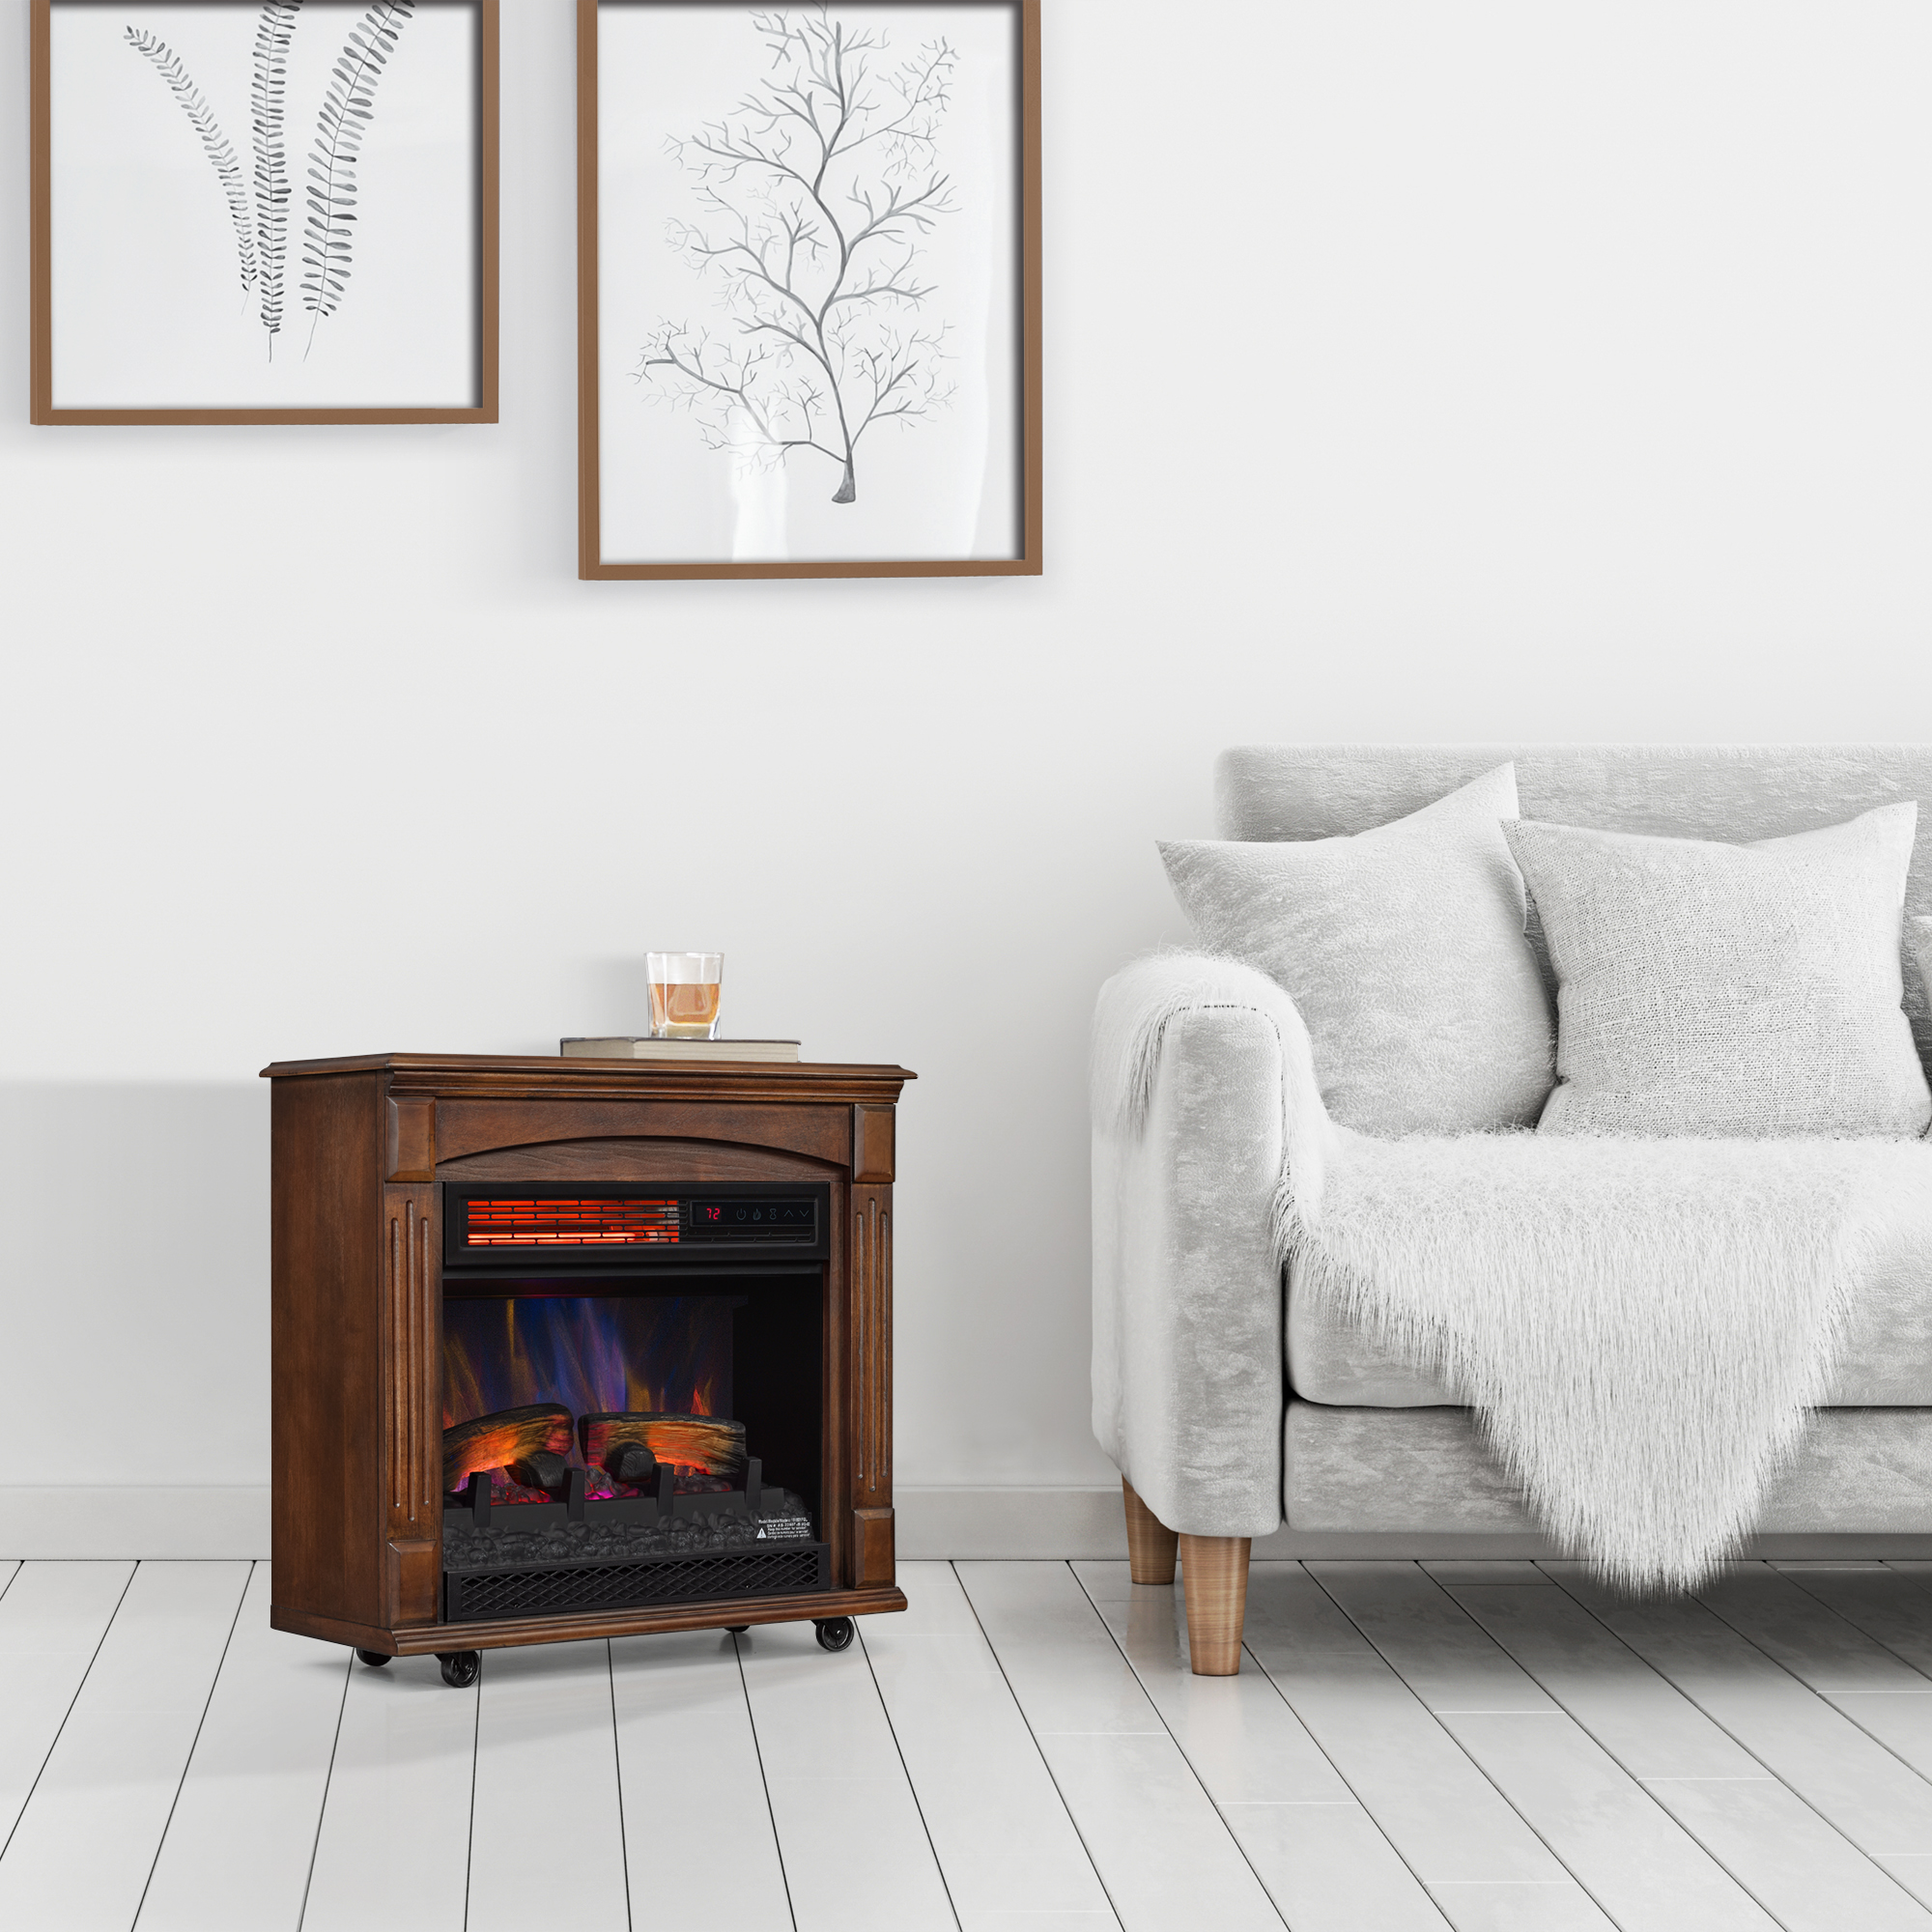 ChimneyFree Rolling Mantel with 3D Infrared Quartz Electric Fireplace - image 1 of 6